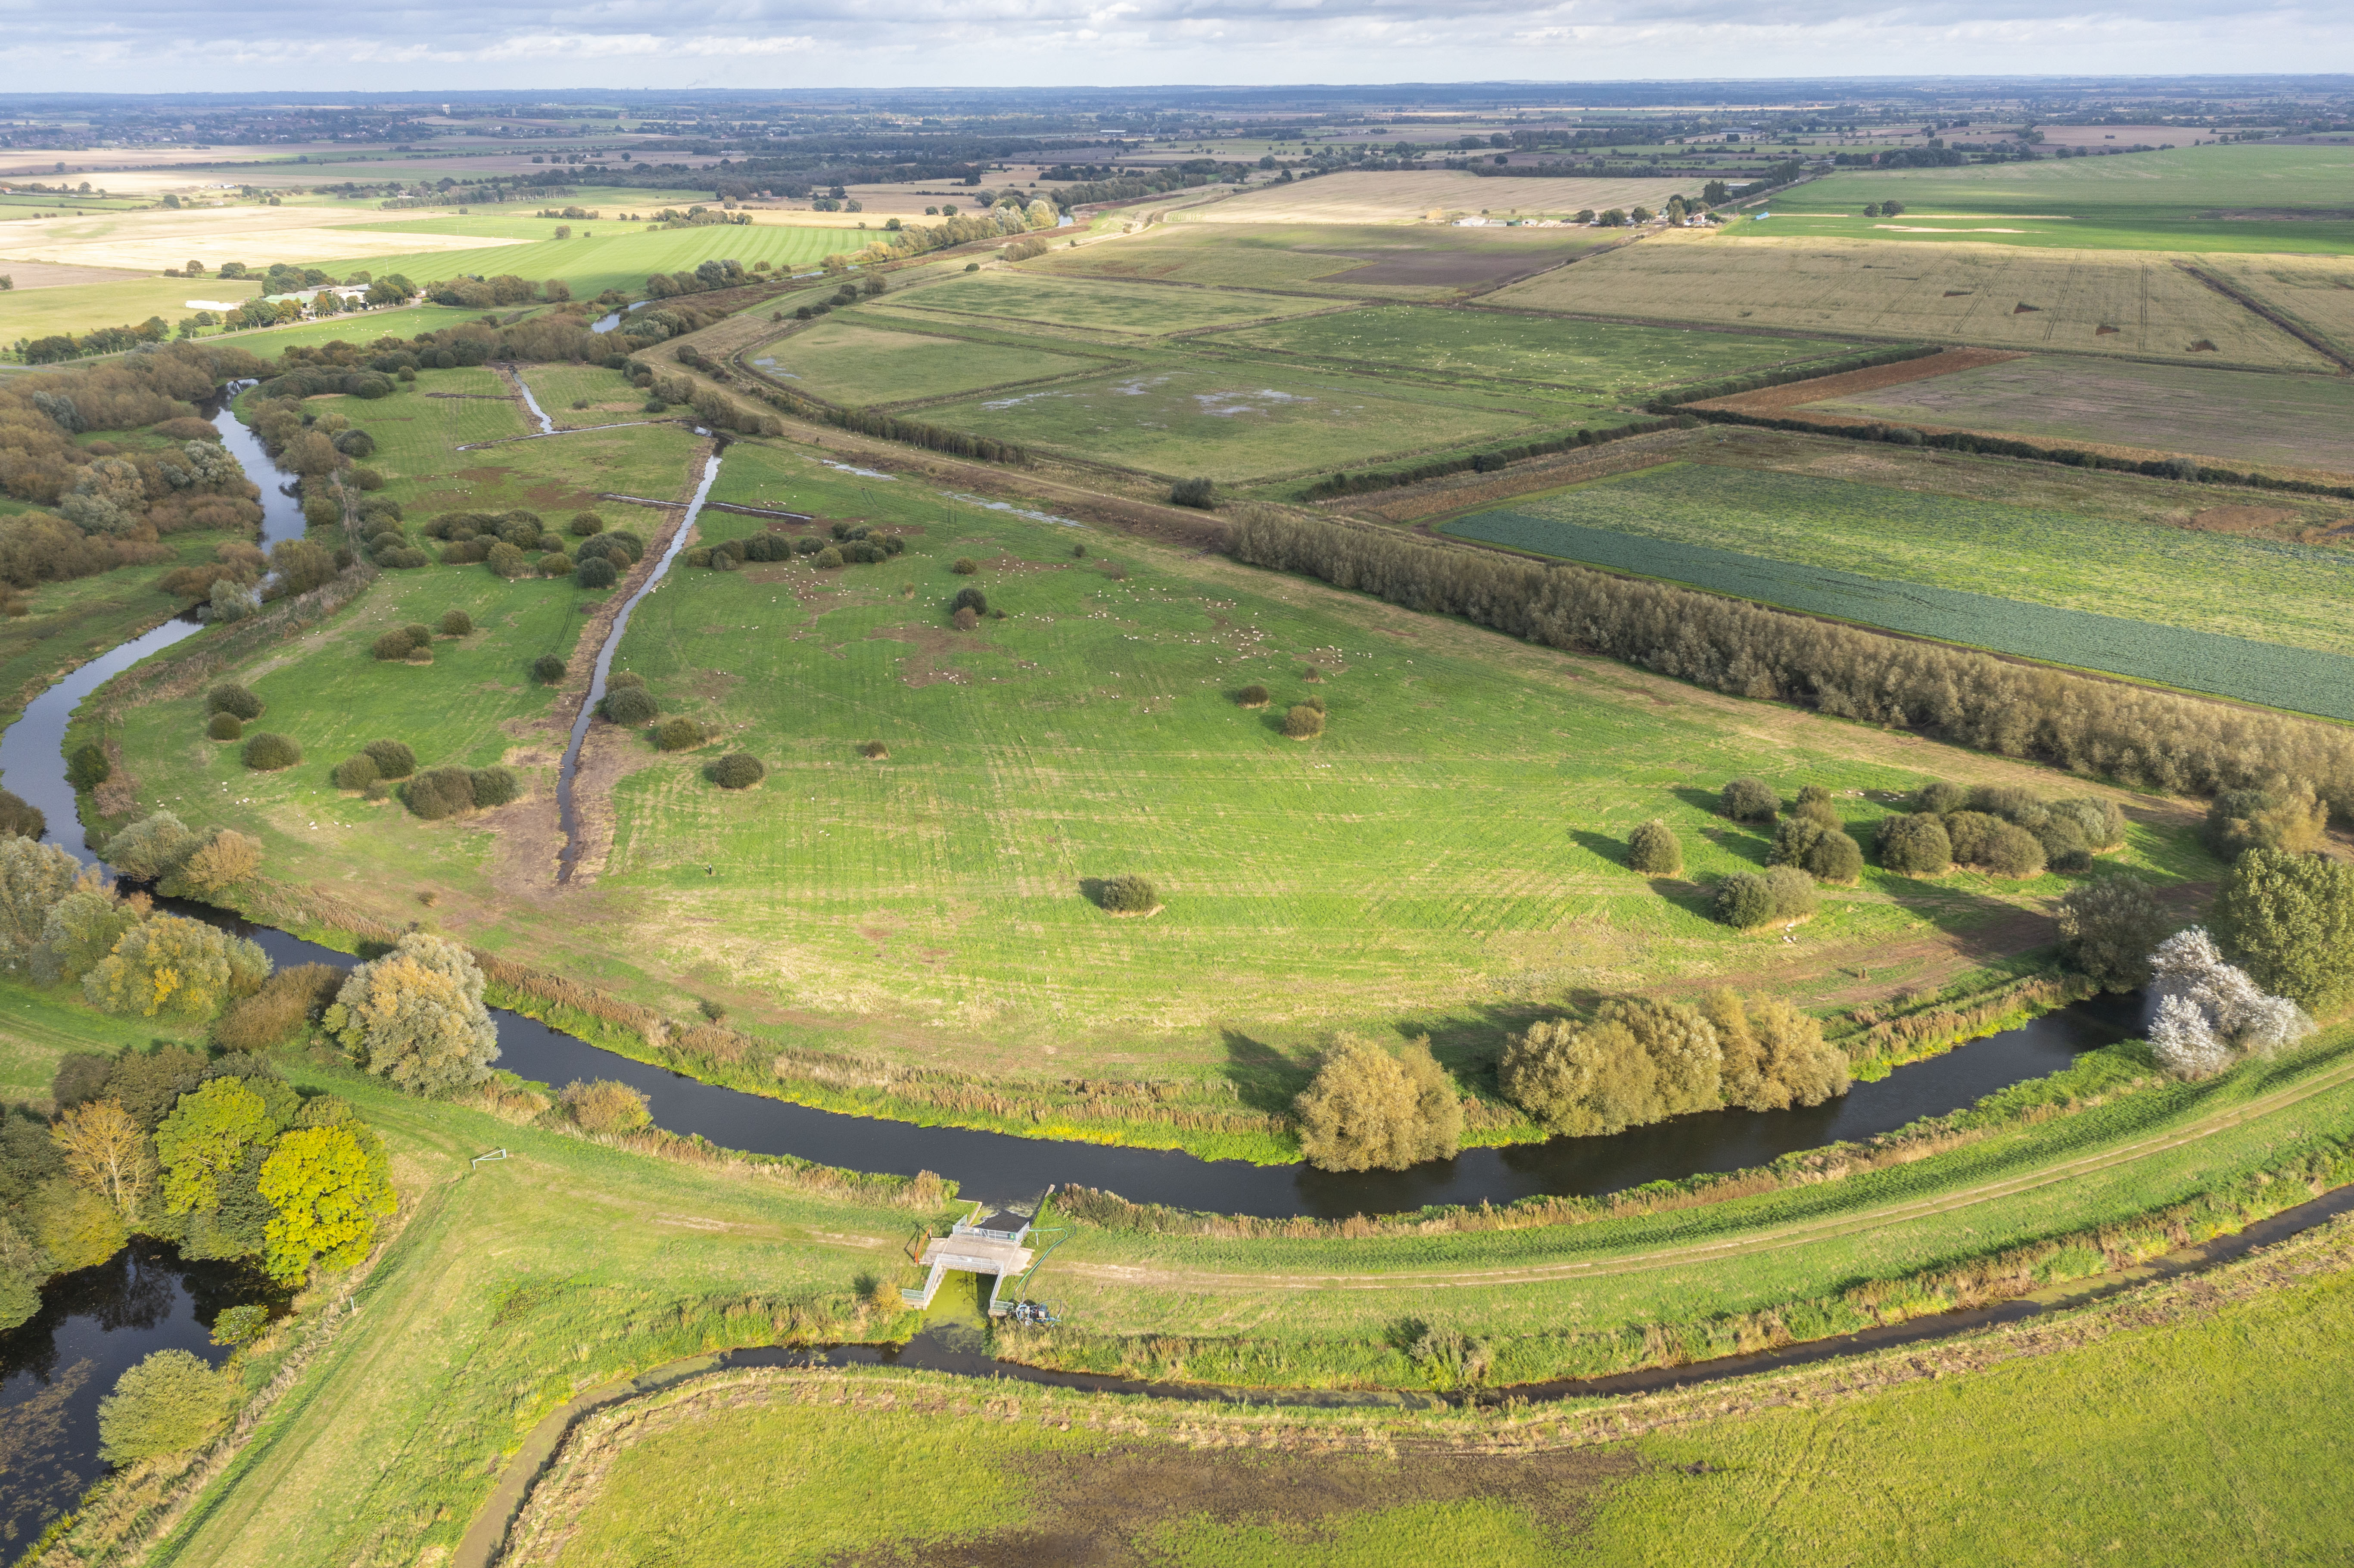 An aerial image of the SSSI showing various watercourses and walkways, vegetation and agricultural land.